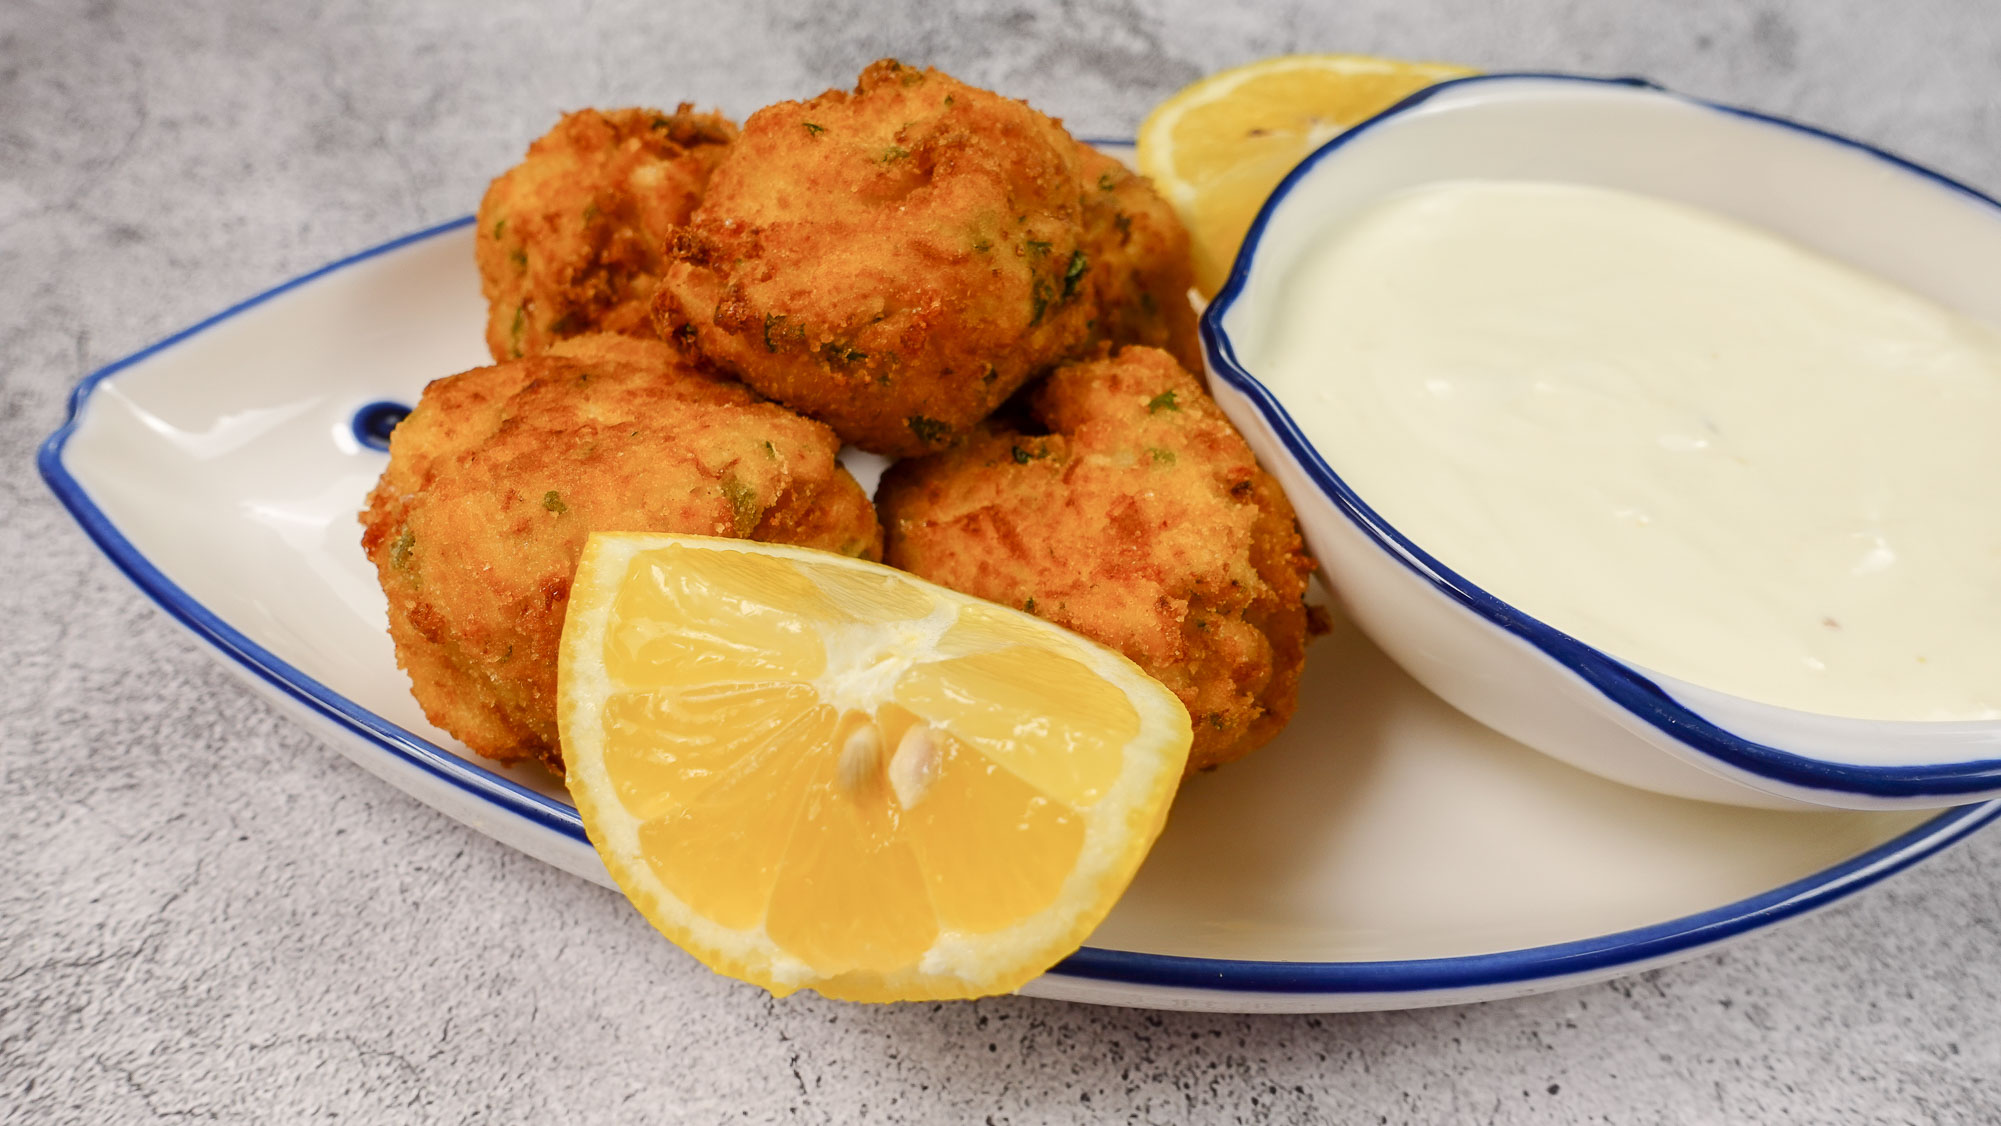 Irresistible shrimp croquettes on a plate, with pieces of lemon and a sauce in a bowl served next to them. 